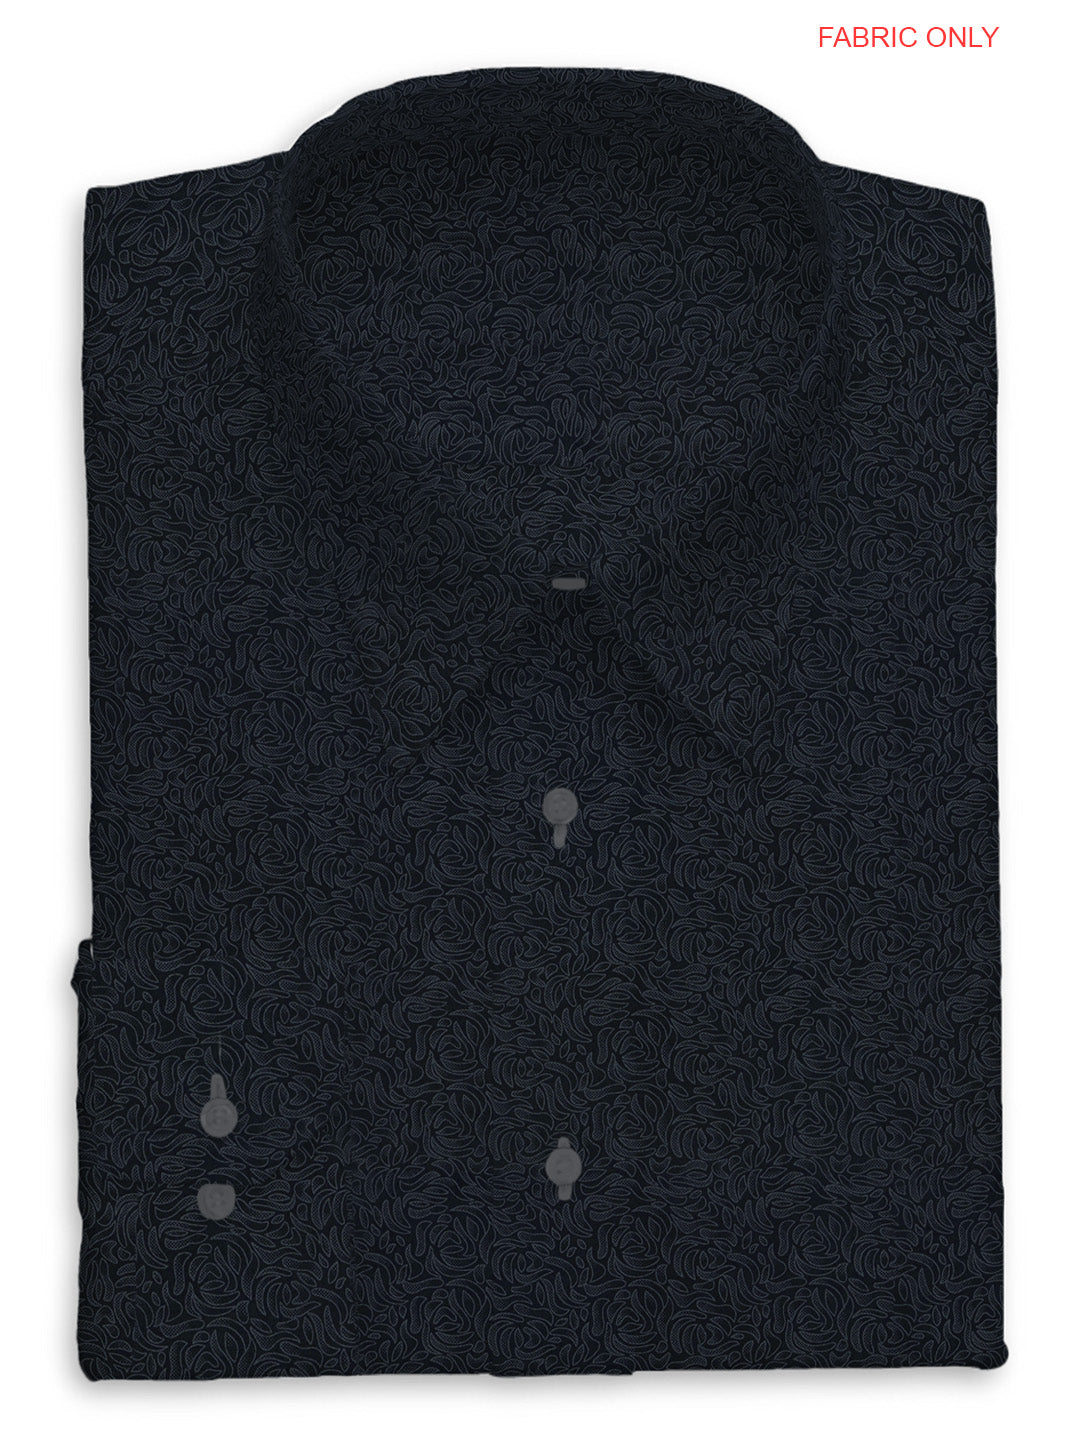 Cotton Black with Grey All-over Print Shirt Fabric ALPHA